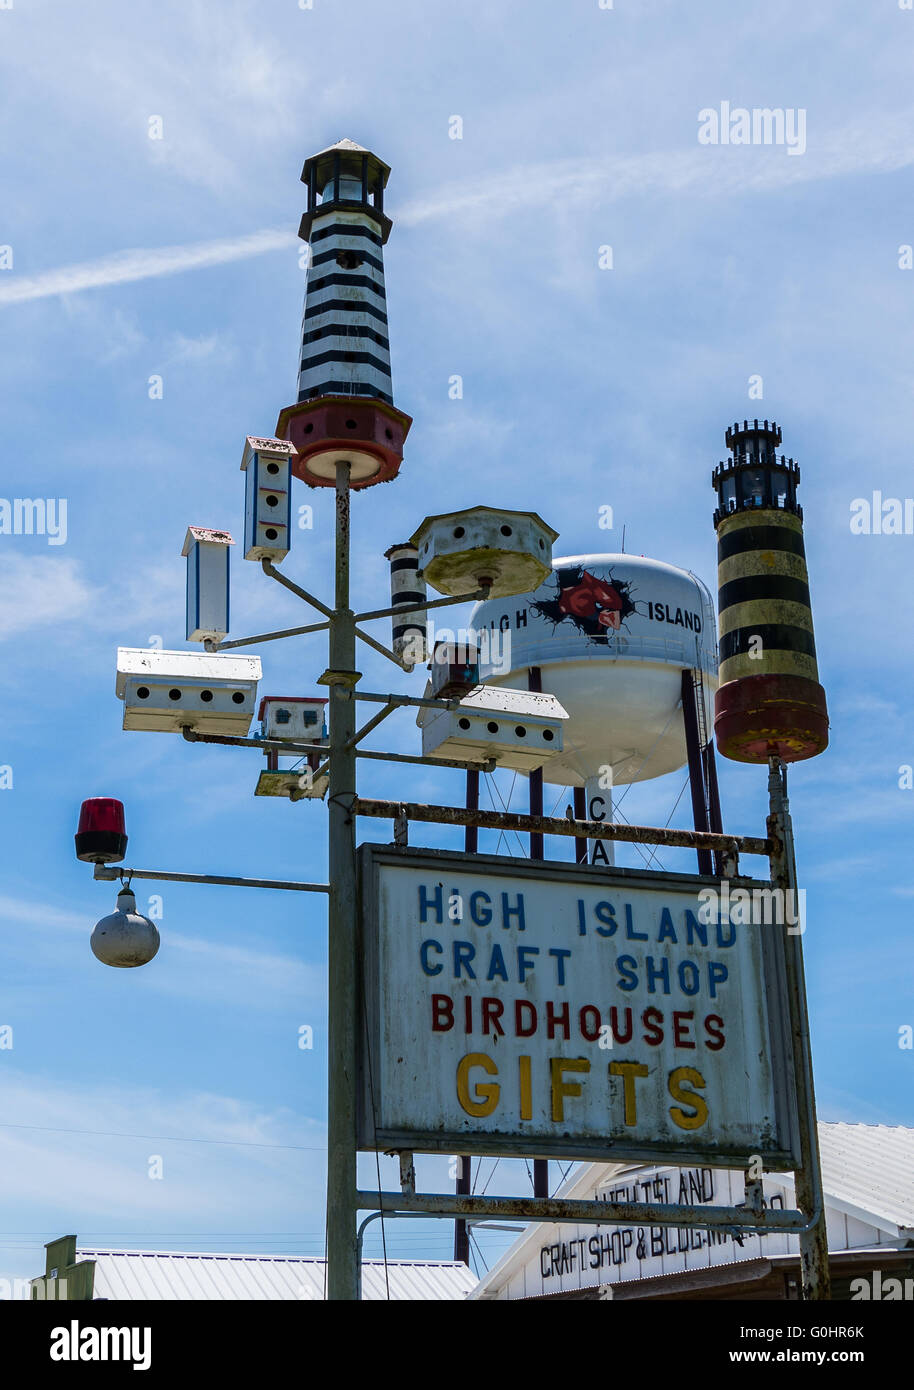 Bird houses of all size and shape in front of iconic water tower at High Island, Texas. USA. Stock Photo